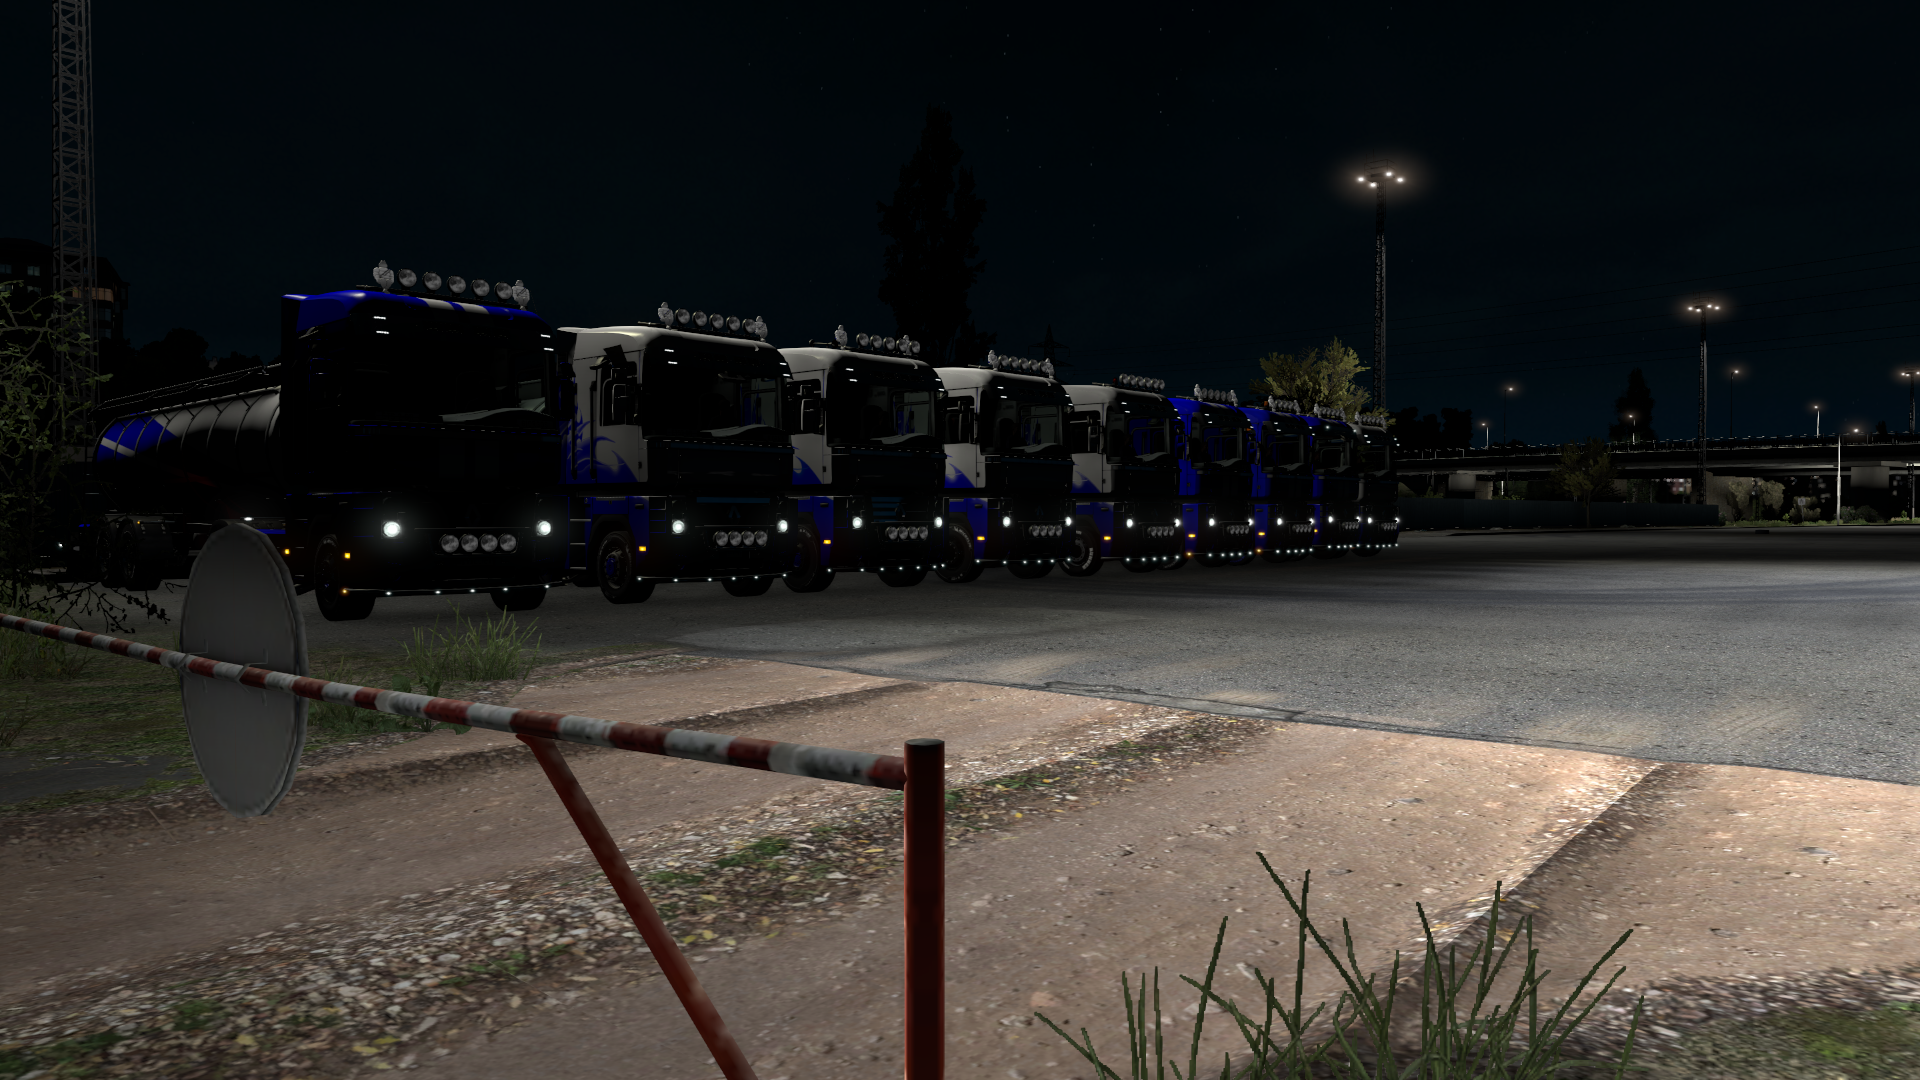 ets2_20210416_215919_00.png